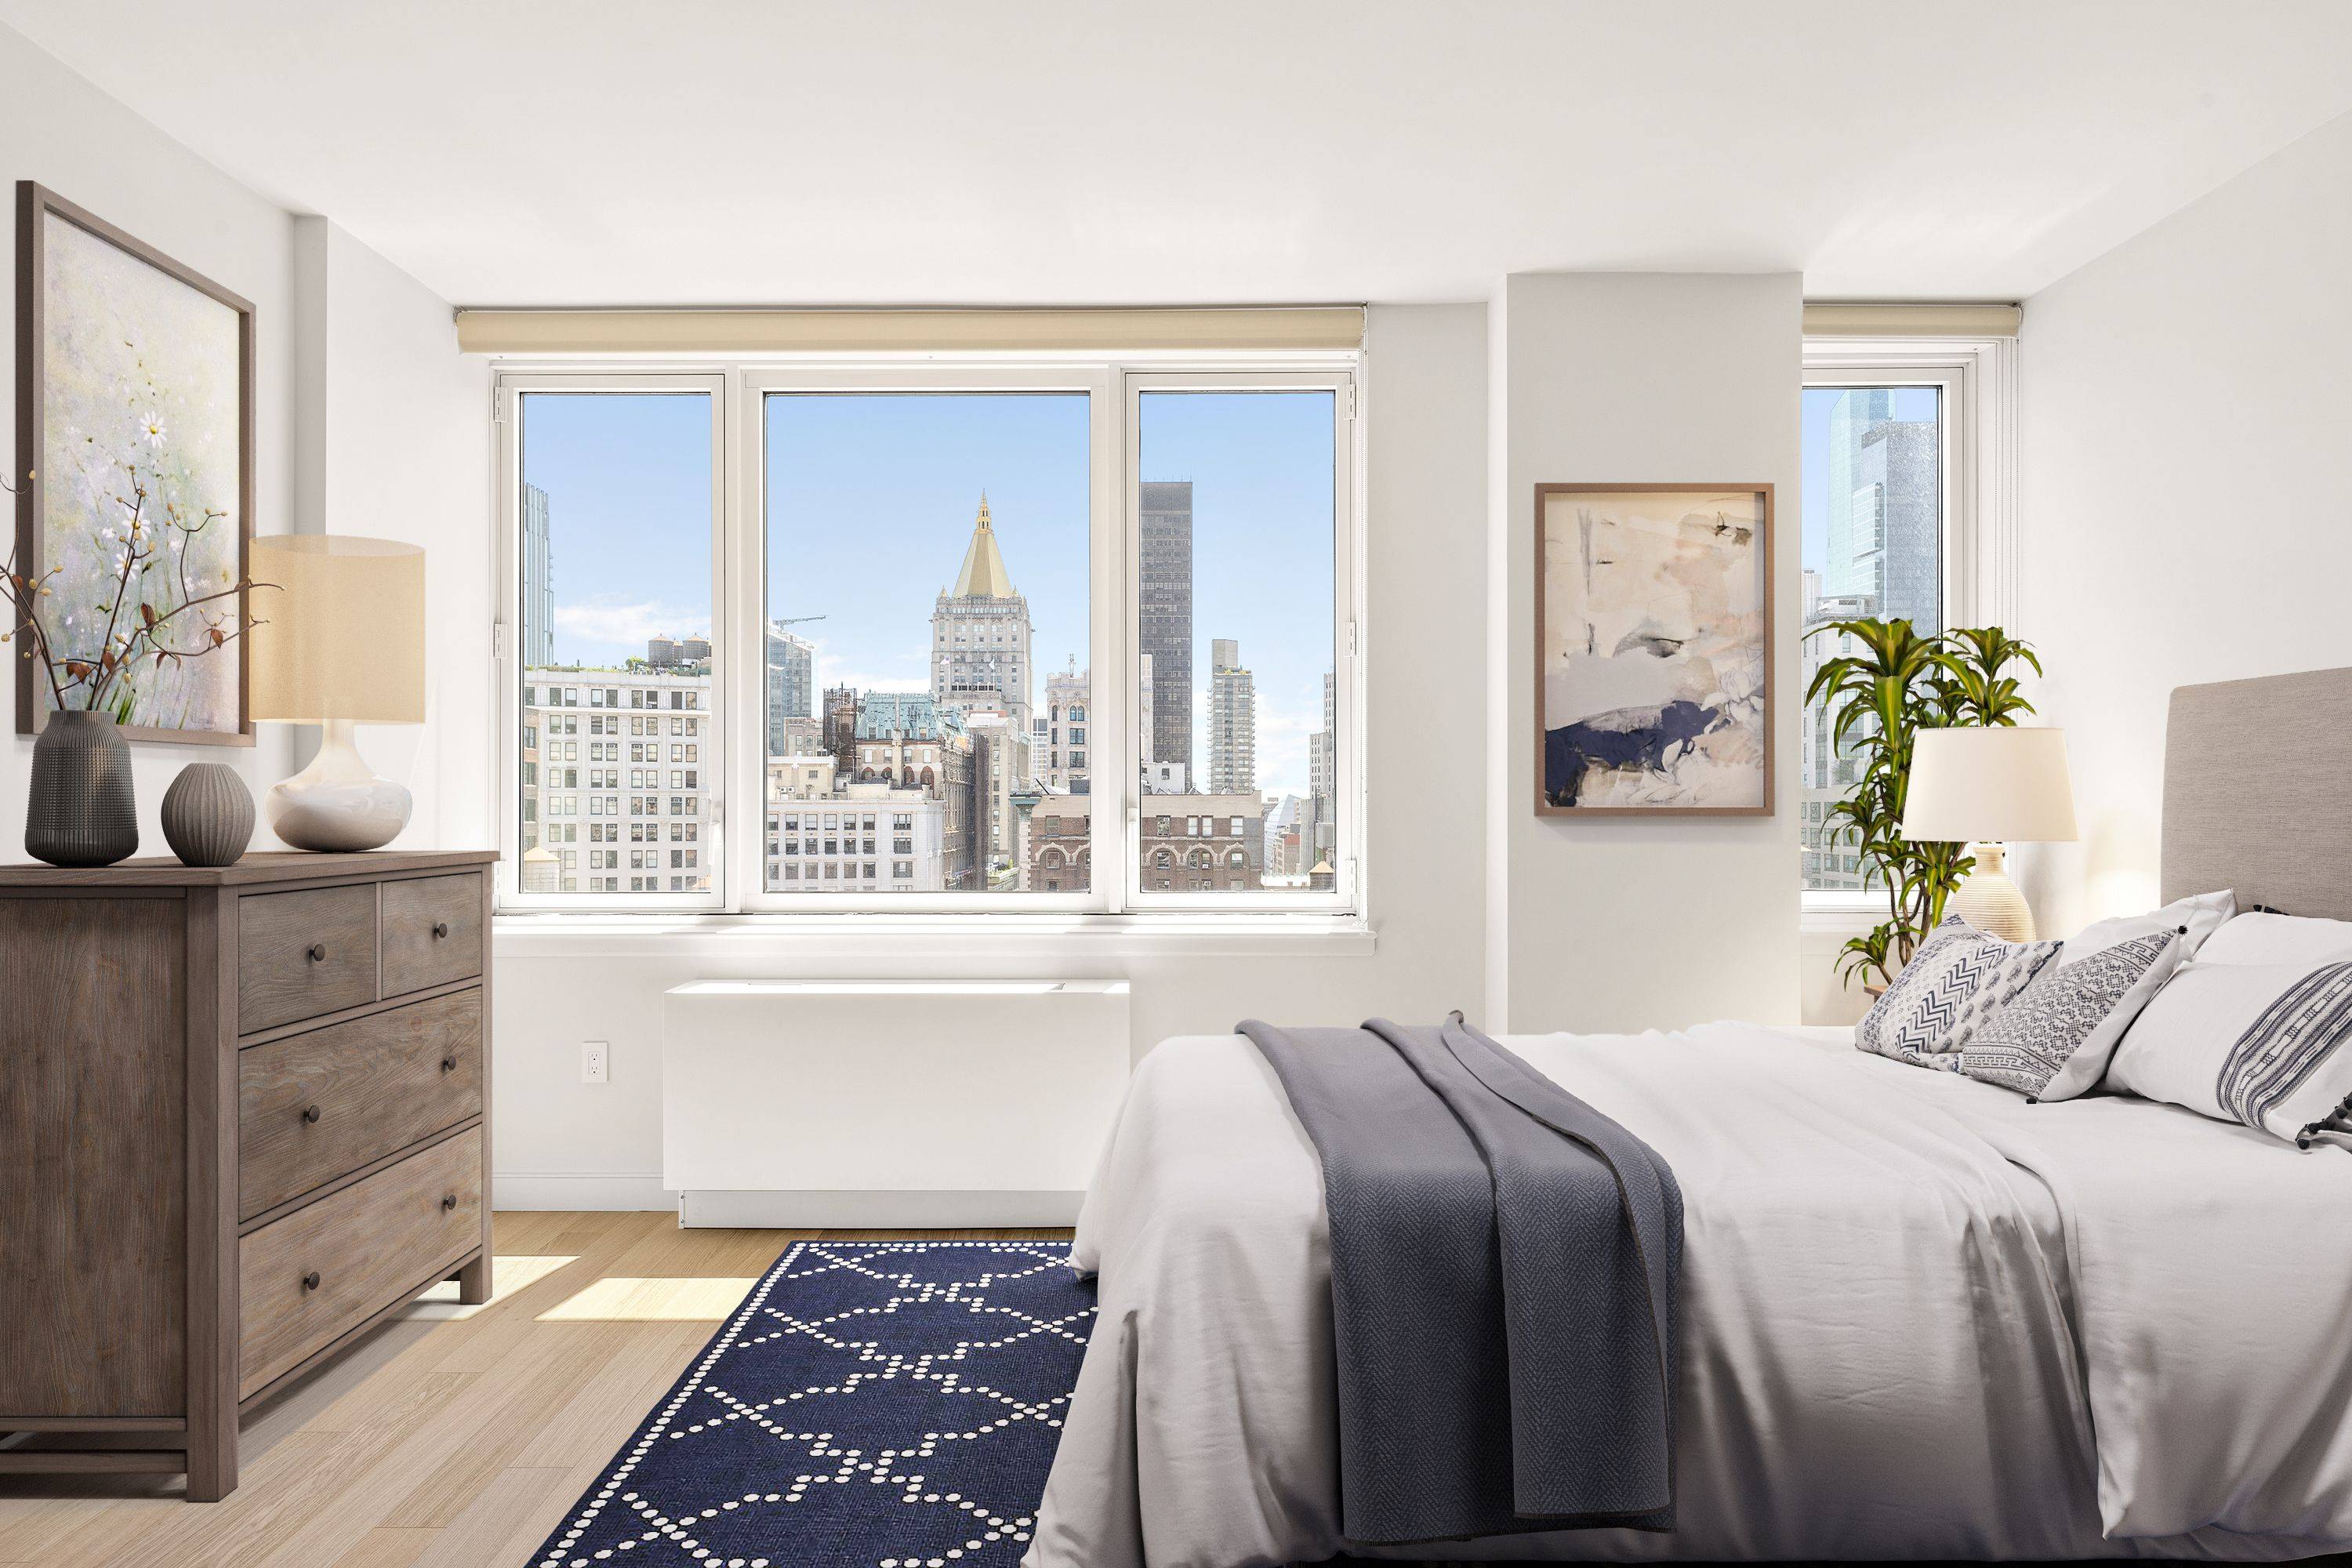 This ALCOVE STUDIO 1BA has outstanding views to the east.